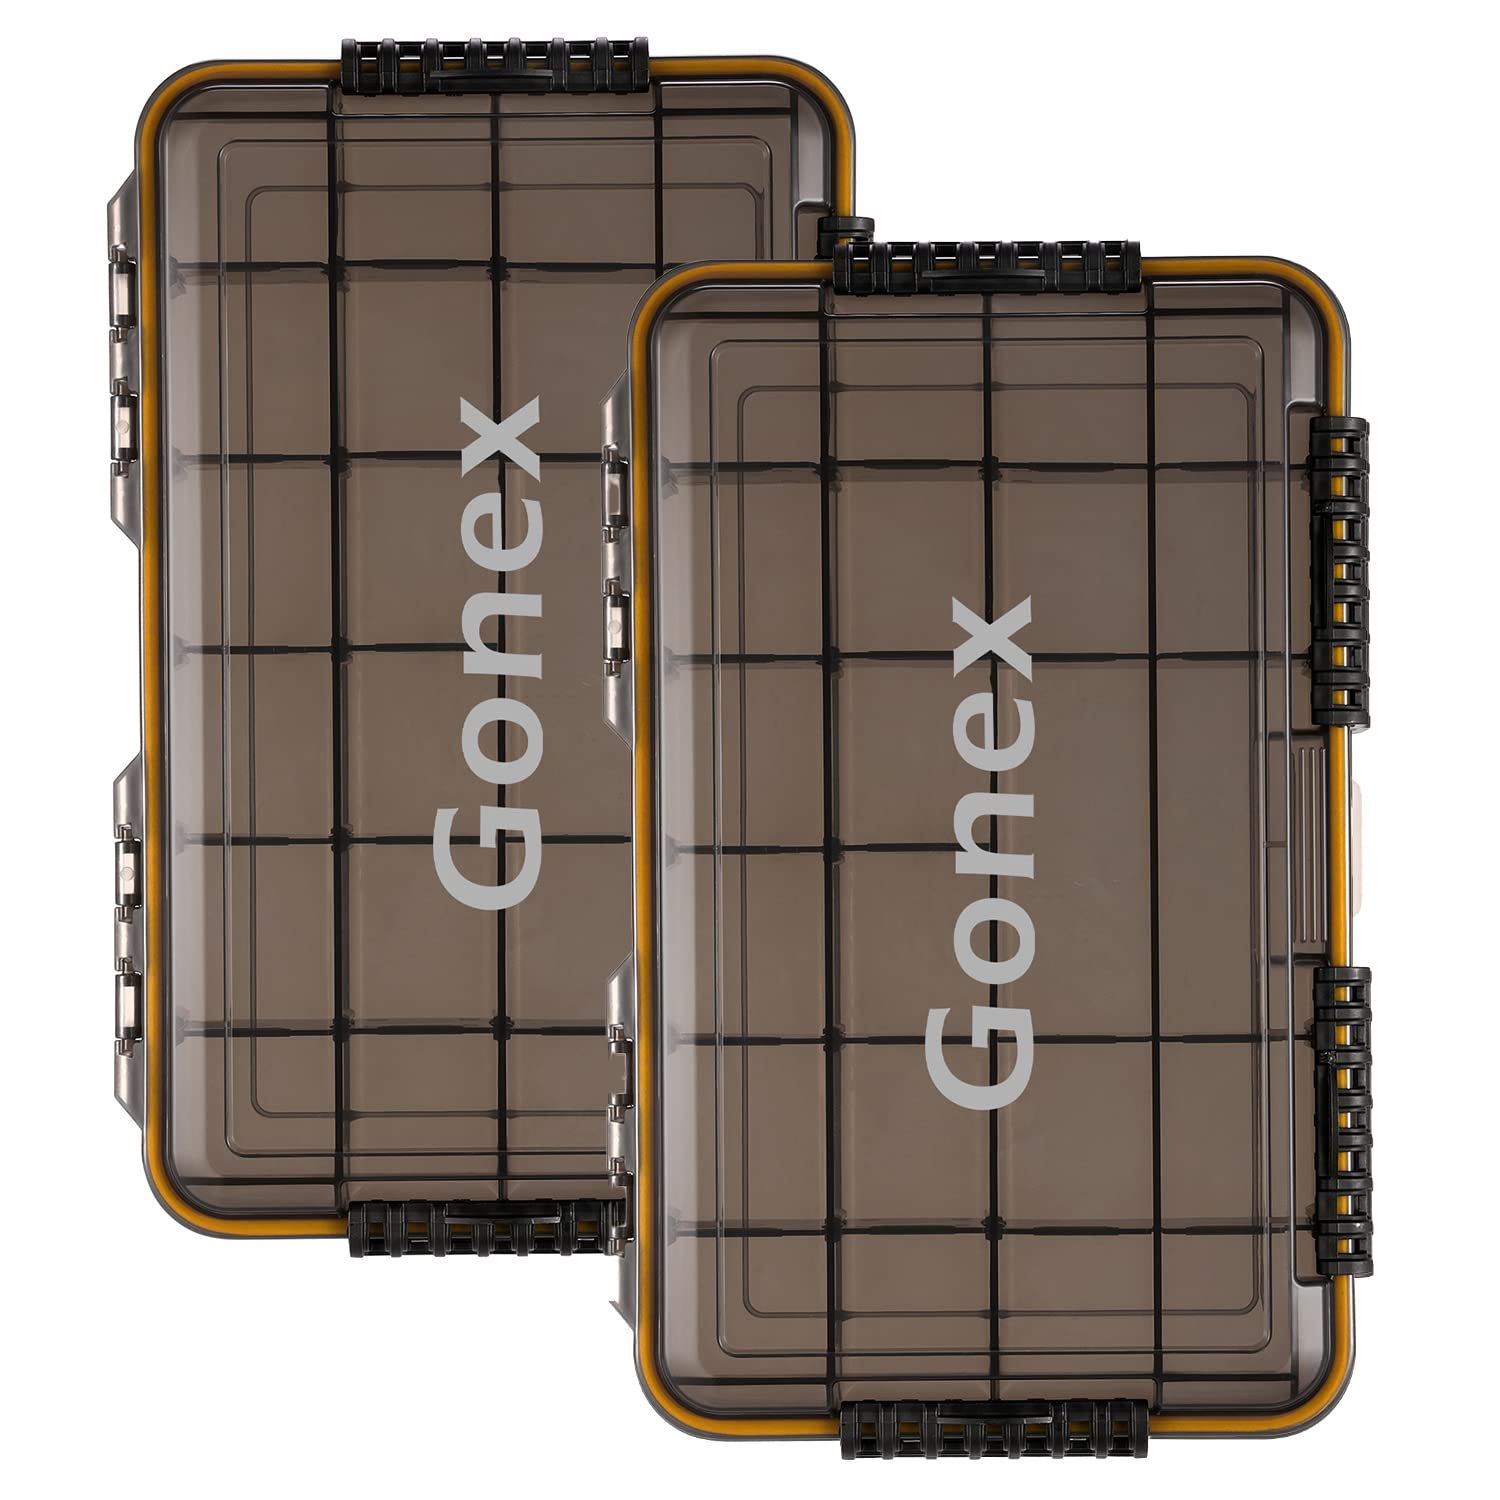 Gonex 3700 Waterproof Tackle Boxes